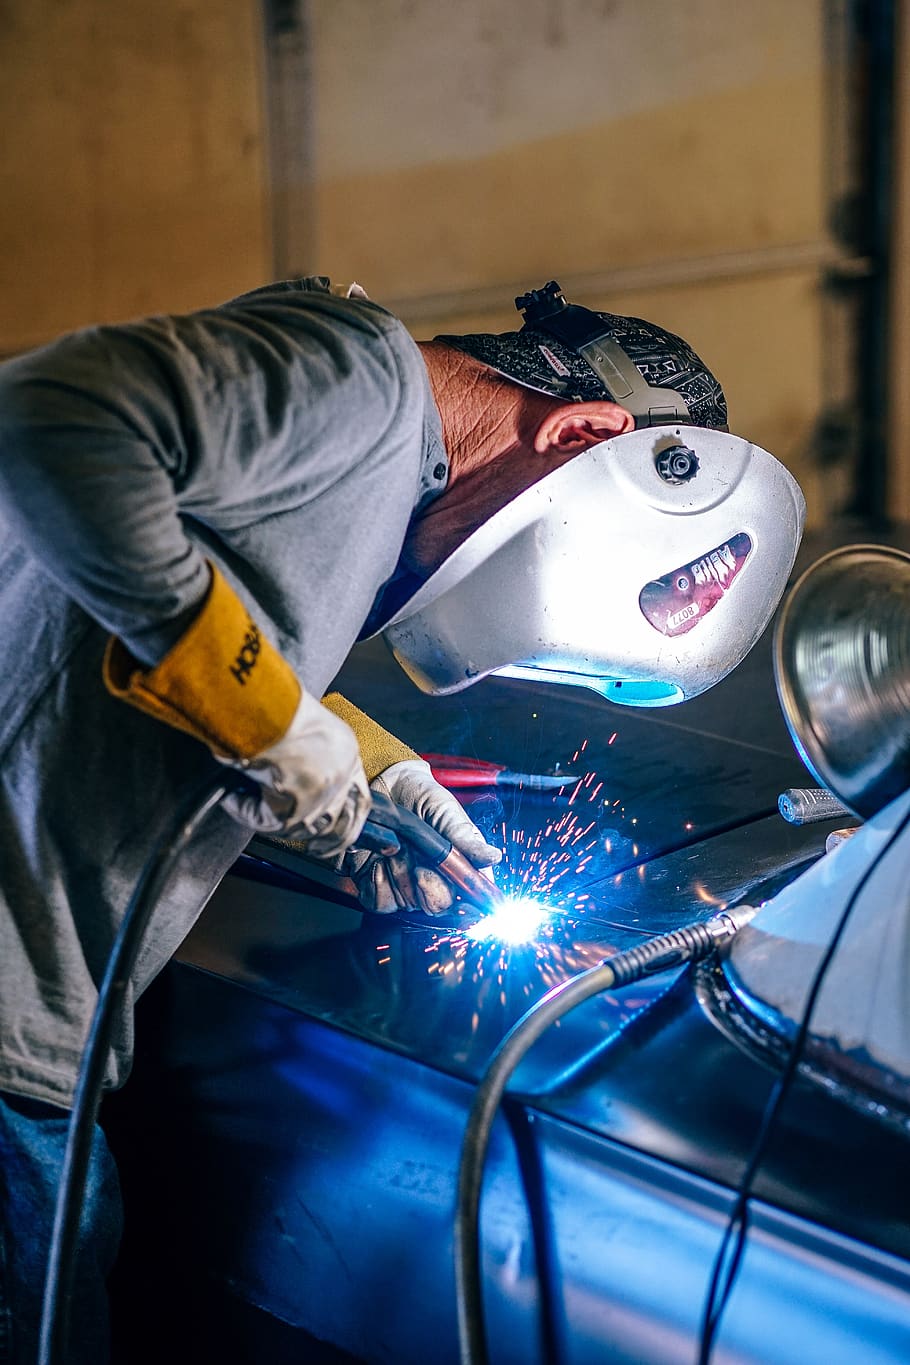 5 Highest Paying Welding Jobs That Pay 100k